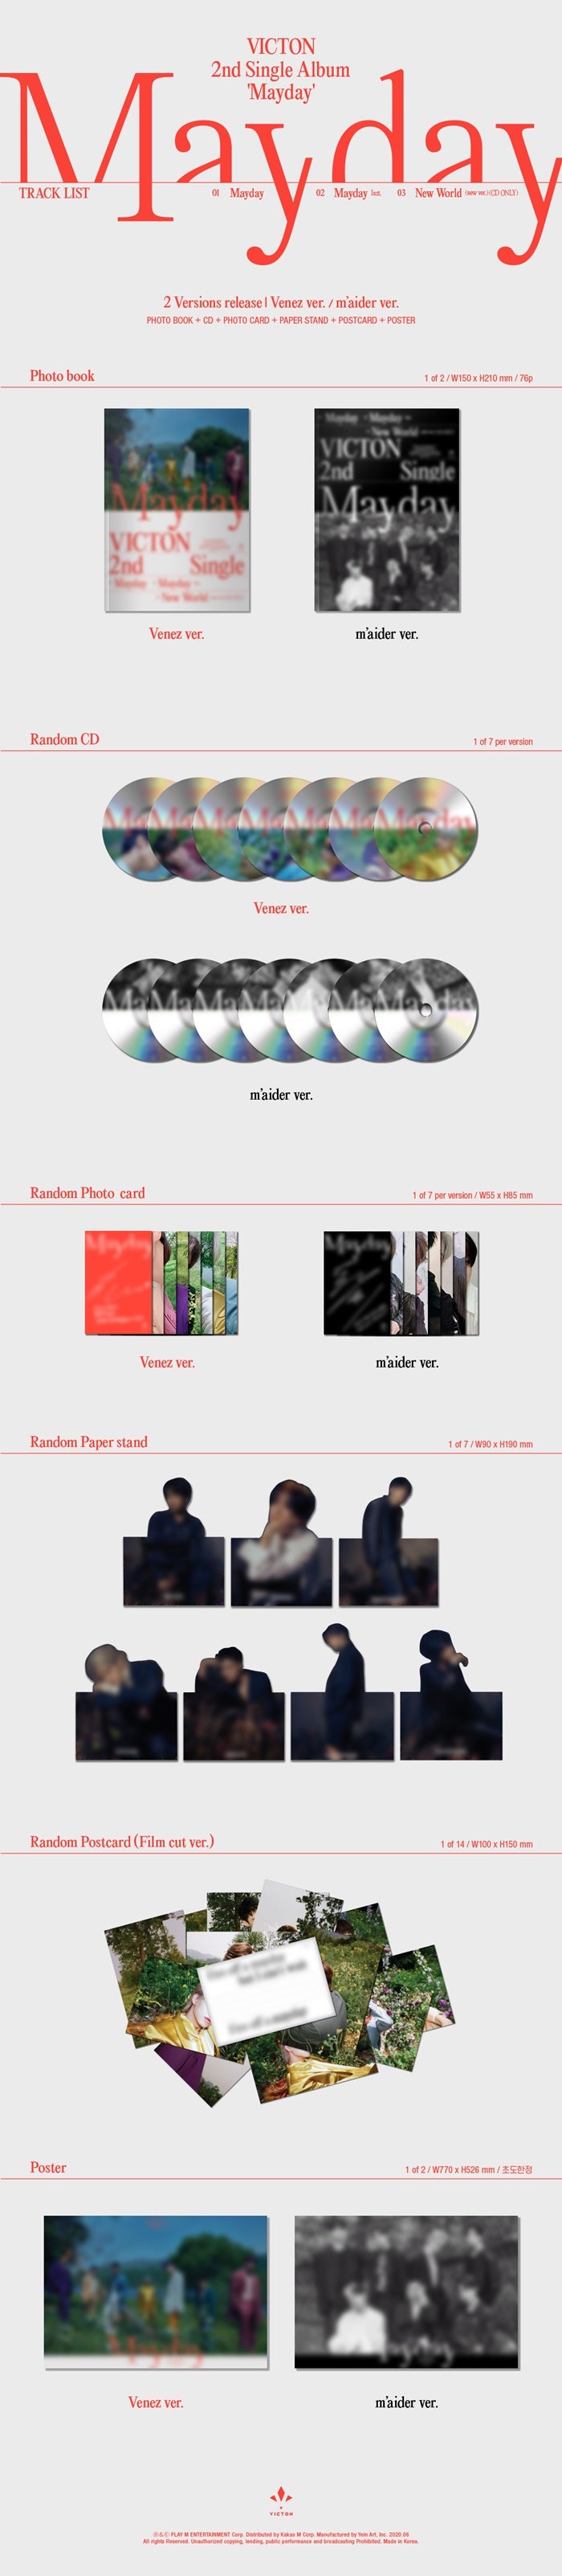 1 CD
1 Photo Book (76 pages)
1 Photo Card
1 Postcard
1 Paper Stand